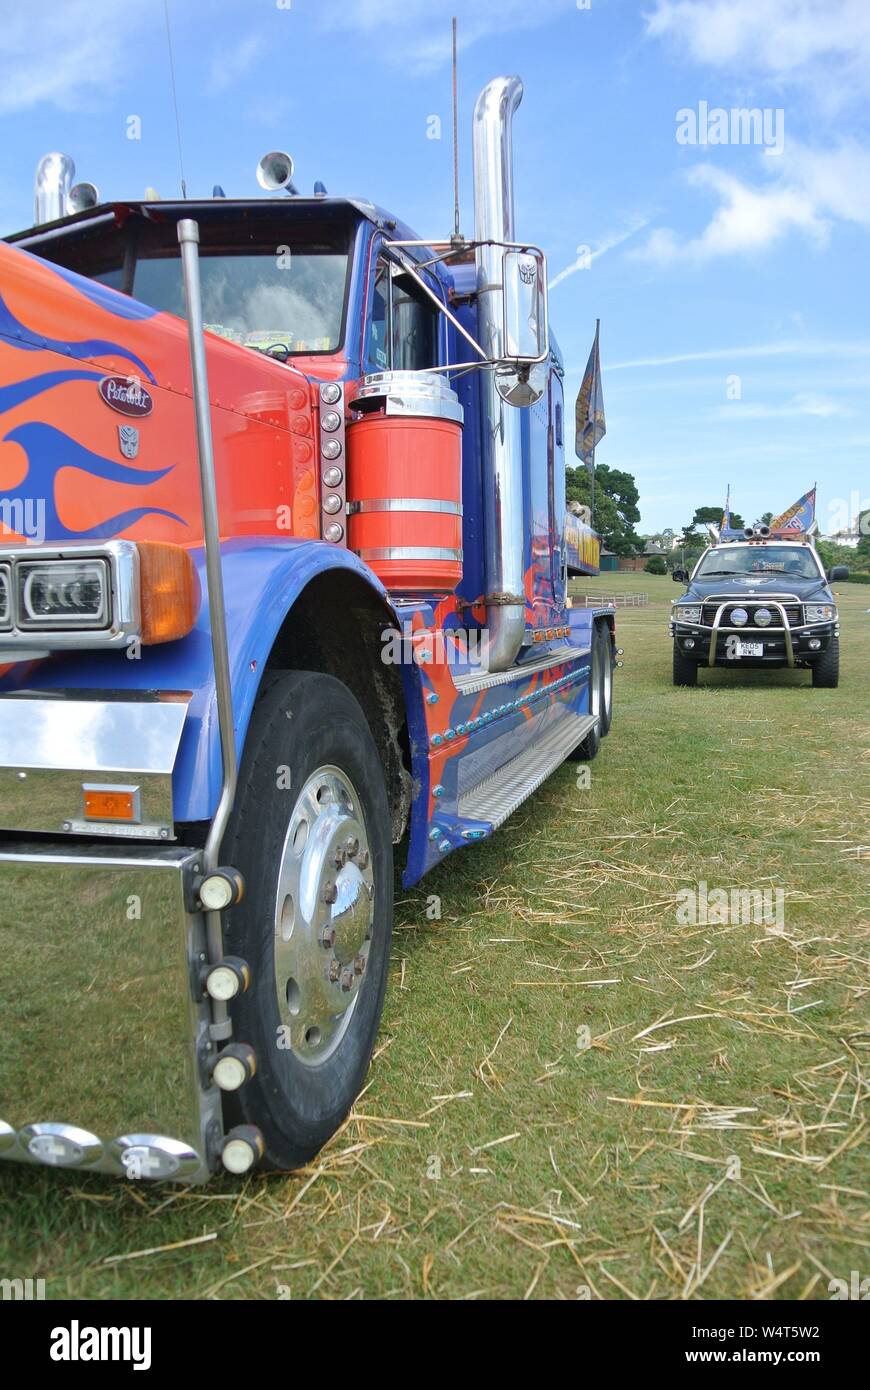 Planet Circus lorry in the colours of Transformer Autobot Optimus Prime, with Decepticon Barricade, at Torre Abbey, Torquay, Devon, England, UK. Stock Photo